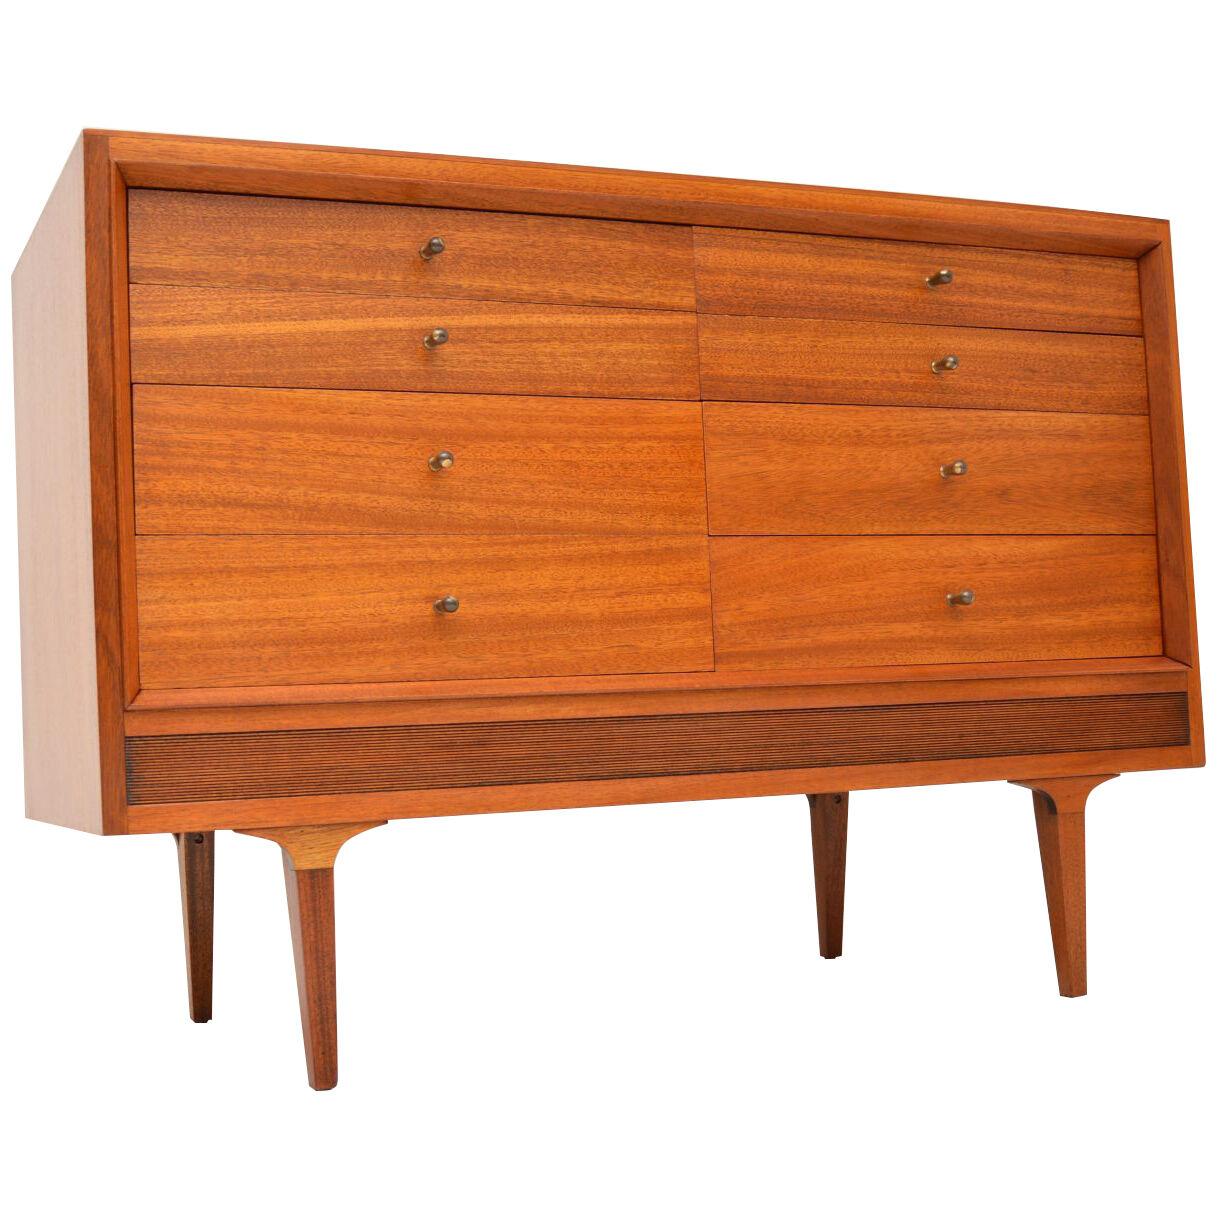 1950's Vintage Mahogany Chest of Drawers / Sideboard